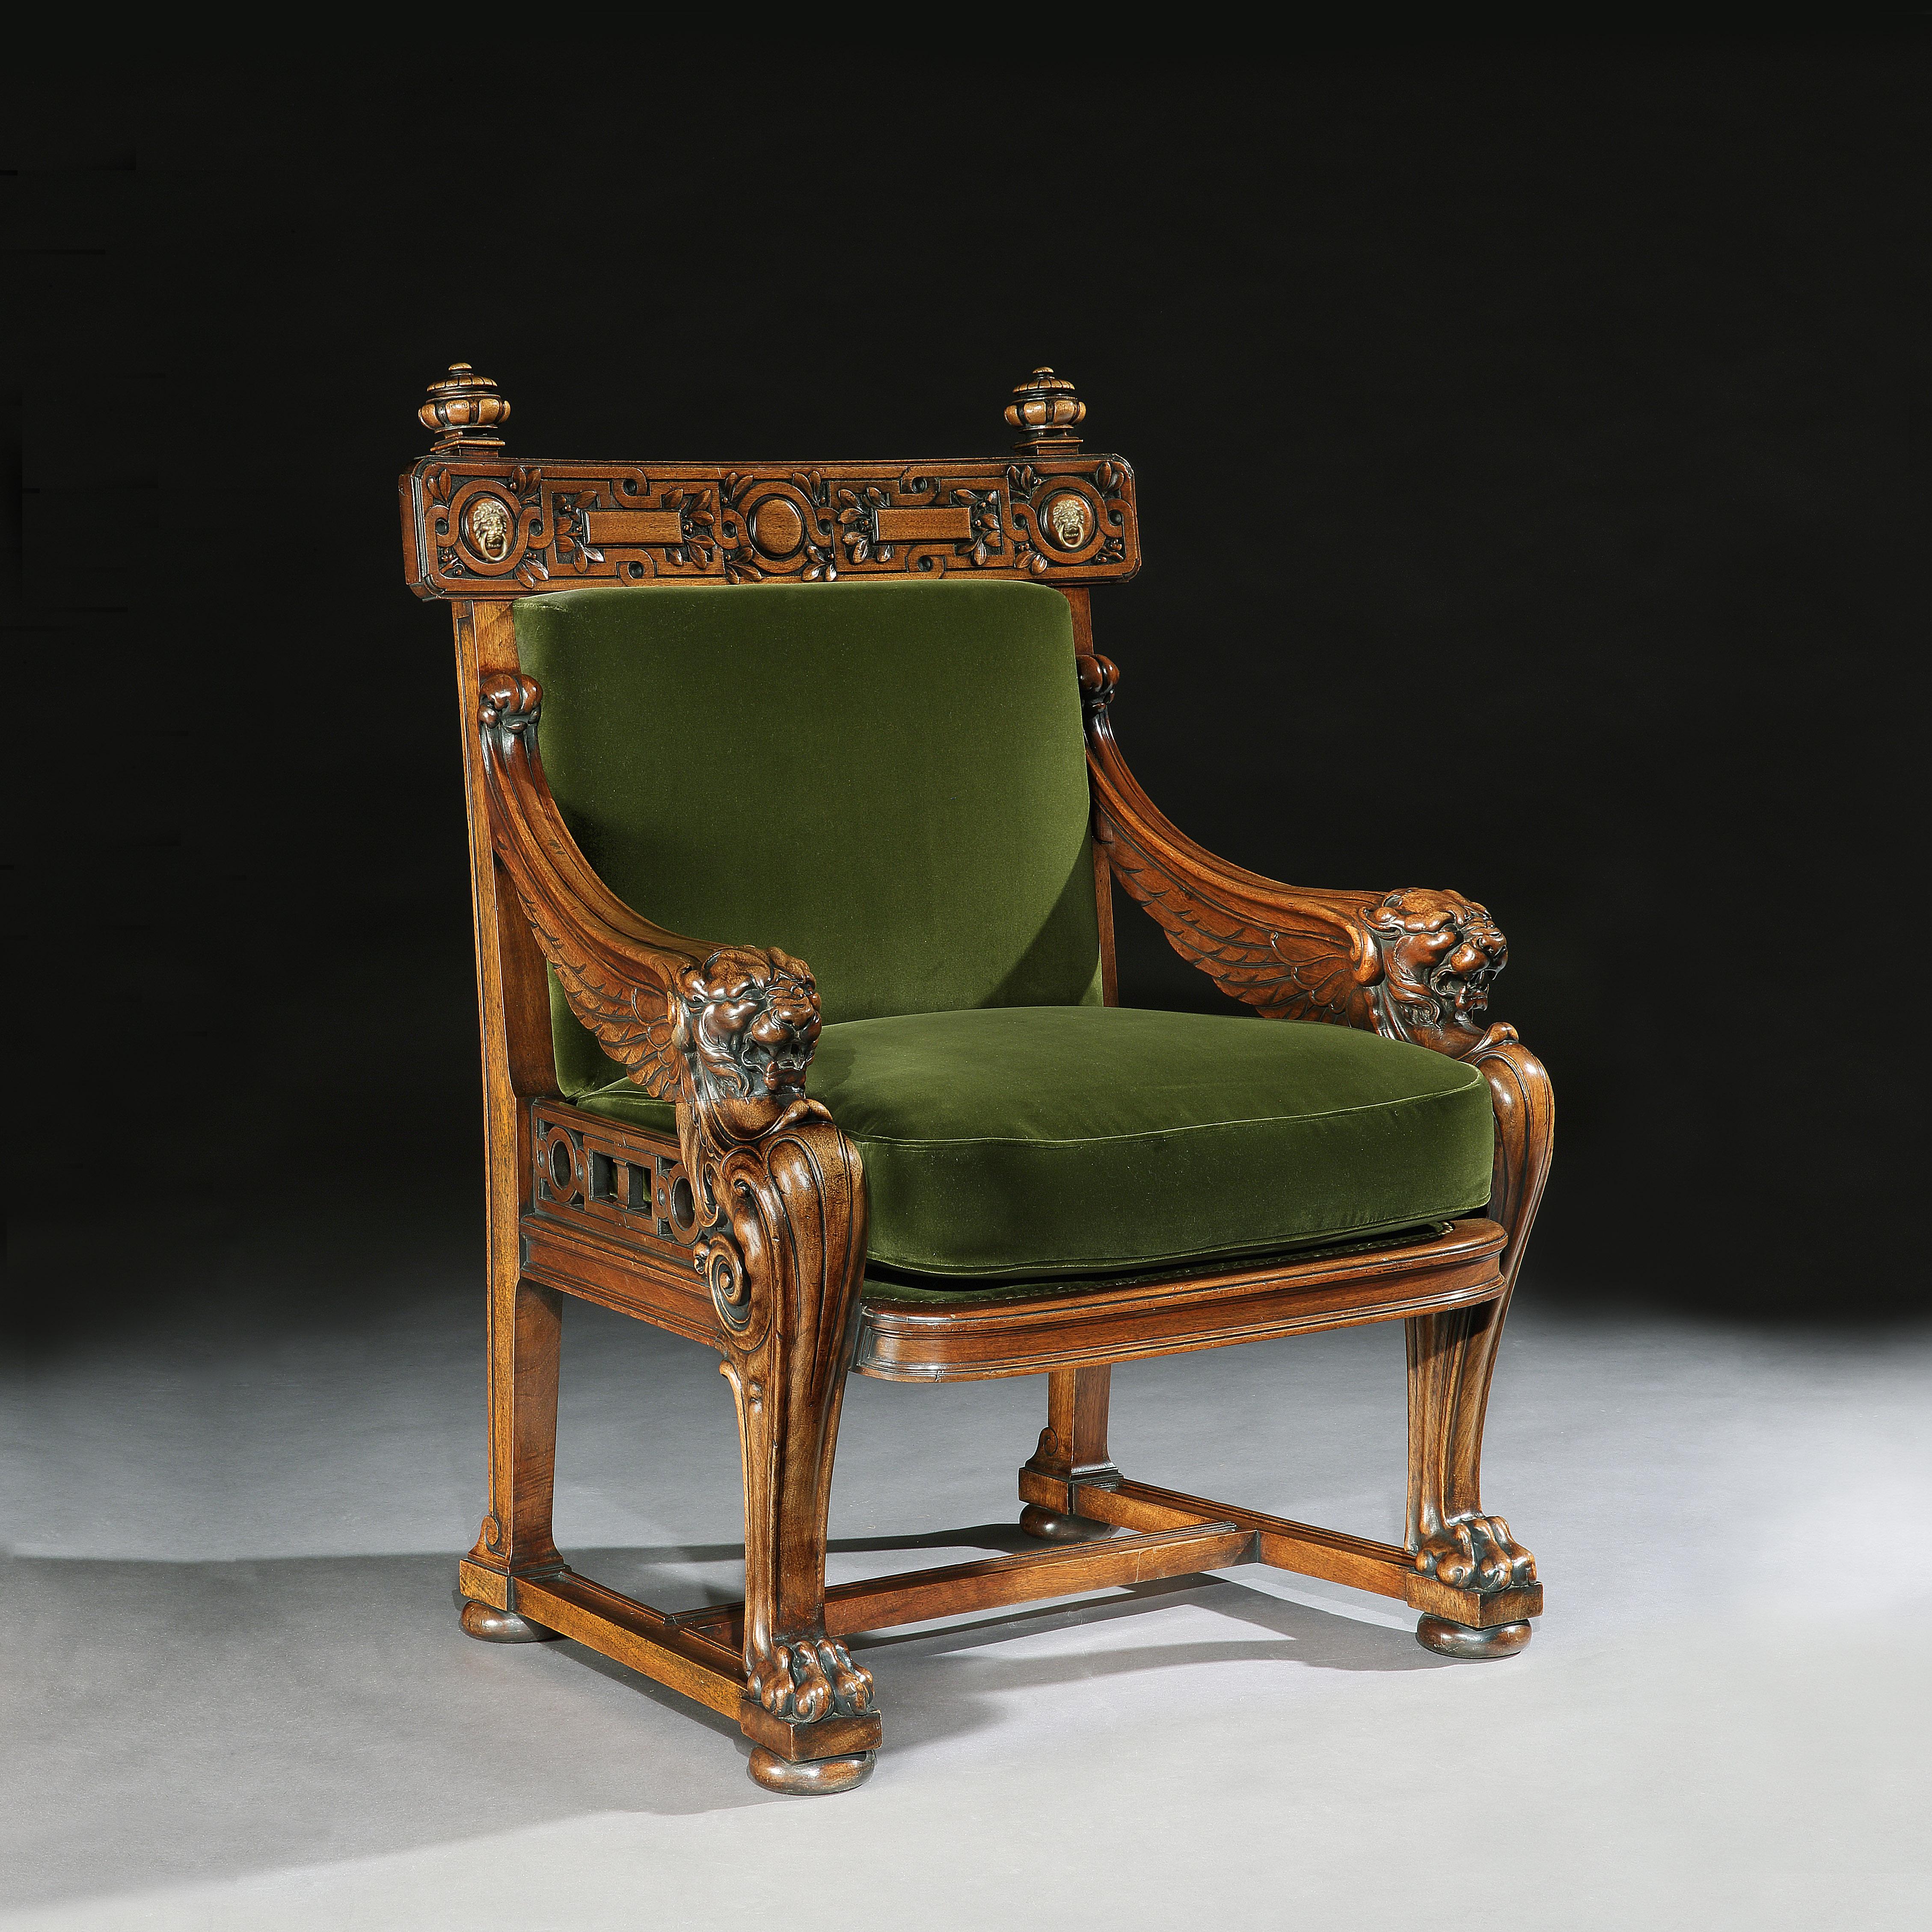 A very fine and impressive European walnut monopodia library armchair, upholstered in a Rosie Uniacke cotton velvet moss, an almost identical armchair having been published in ‘English Furniture 1500-1840 by Geoffrey Beard & Judith